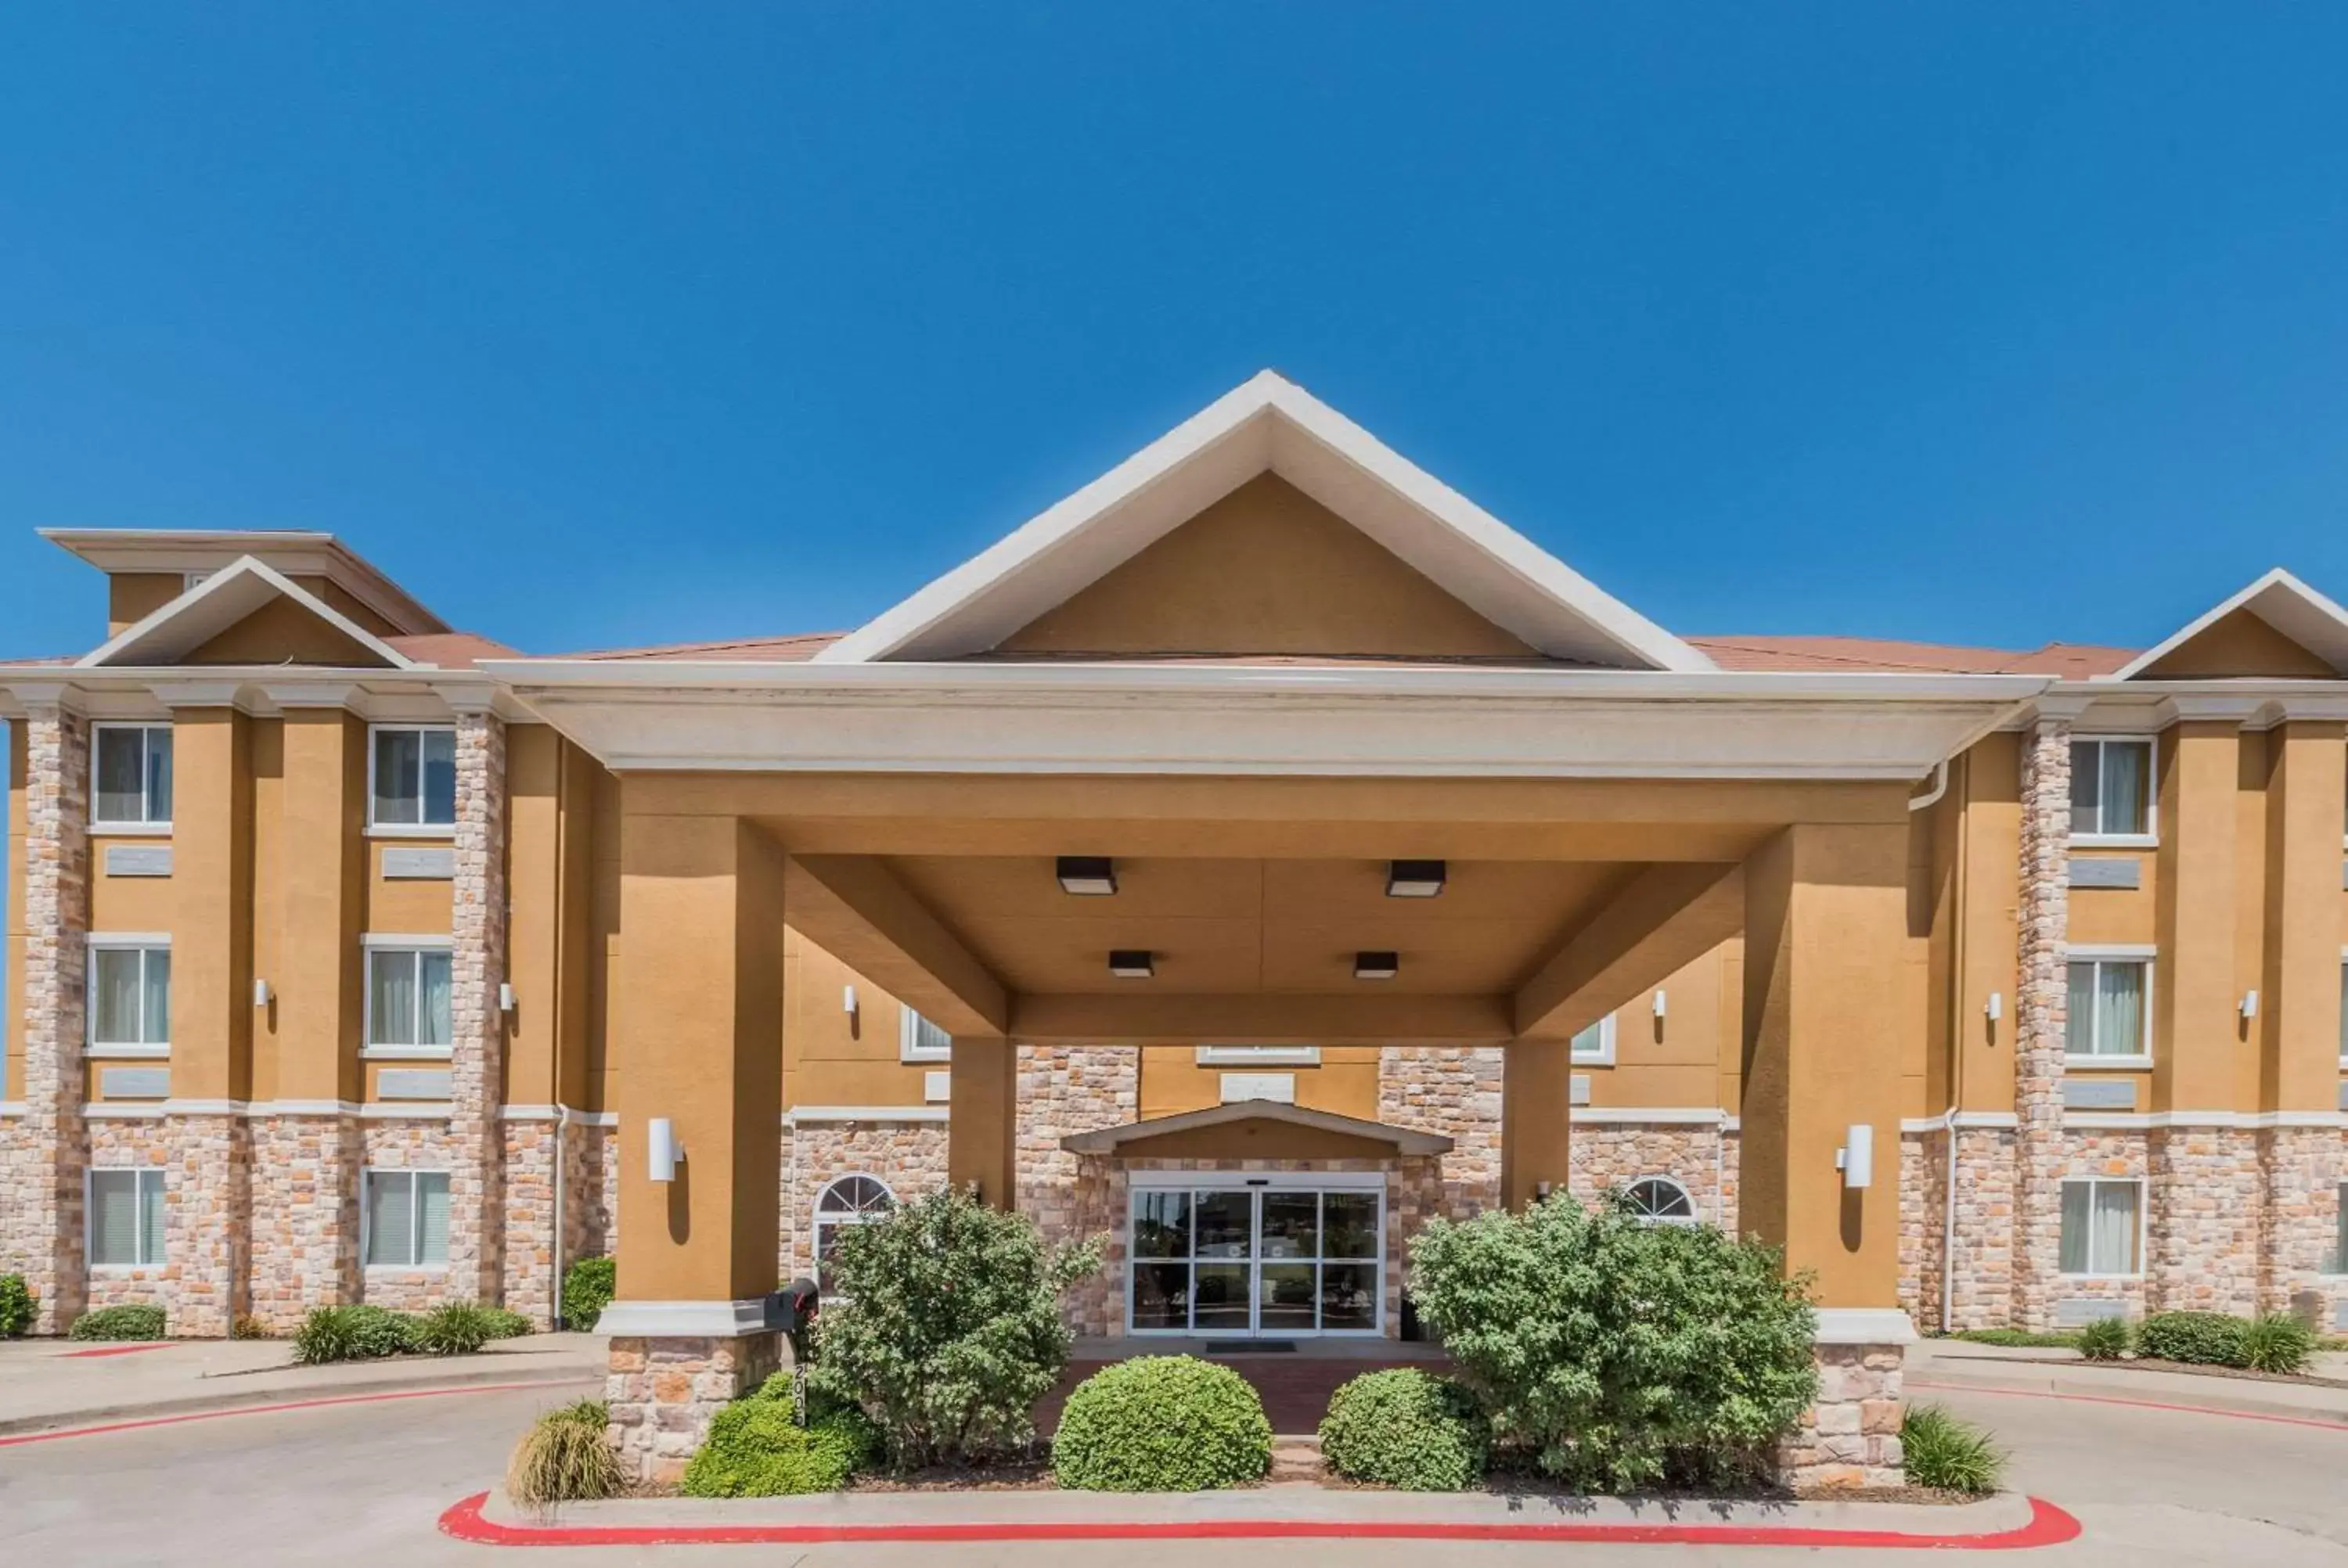 Property Building in Days Inn & Suites by Wyndham Cleburne TX